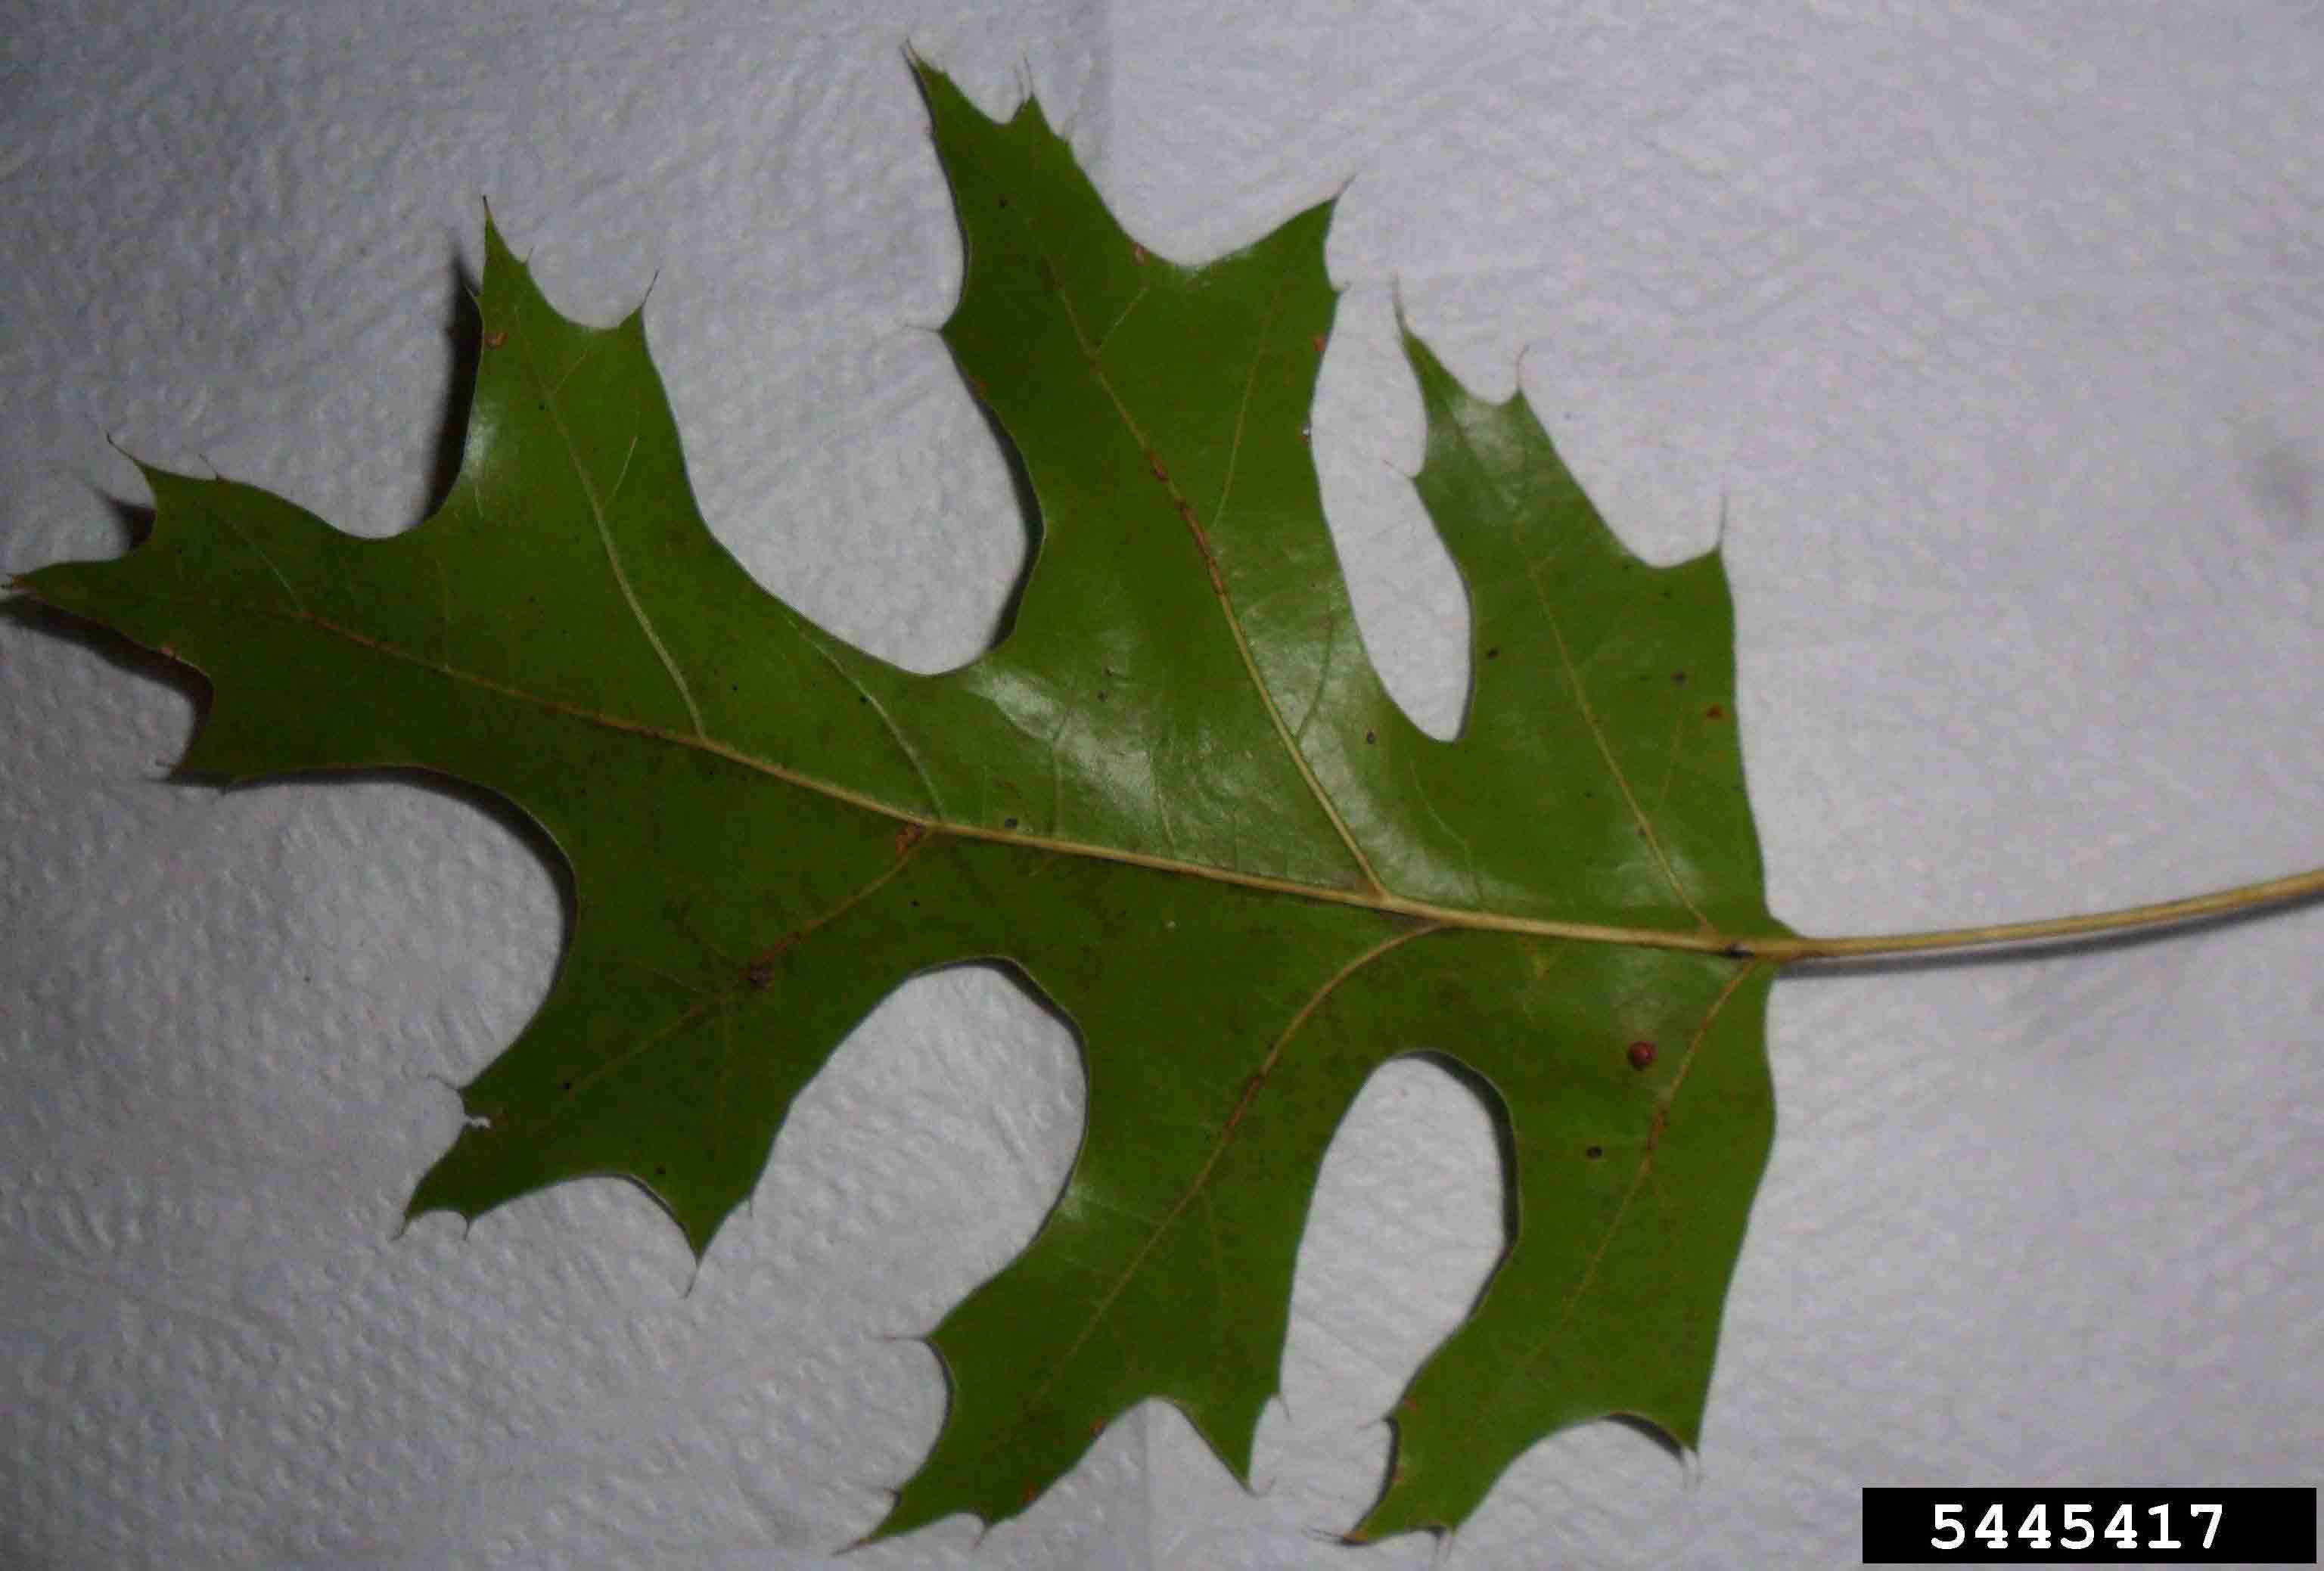 Scarlet oak leaf,  showing smooth underside and deep lobes with bristles on the tips